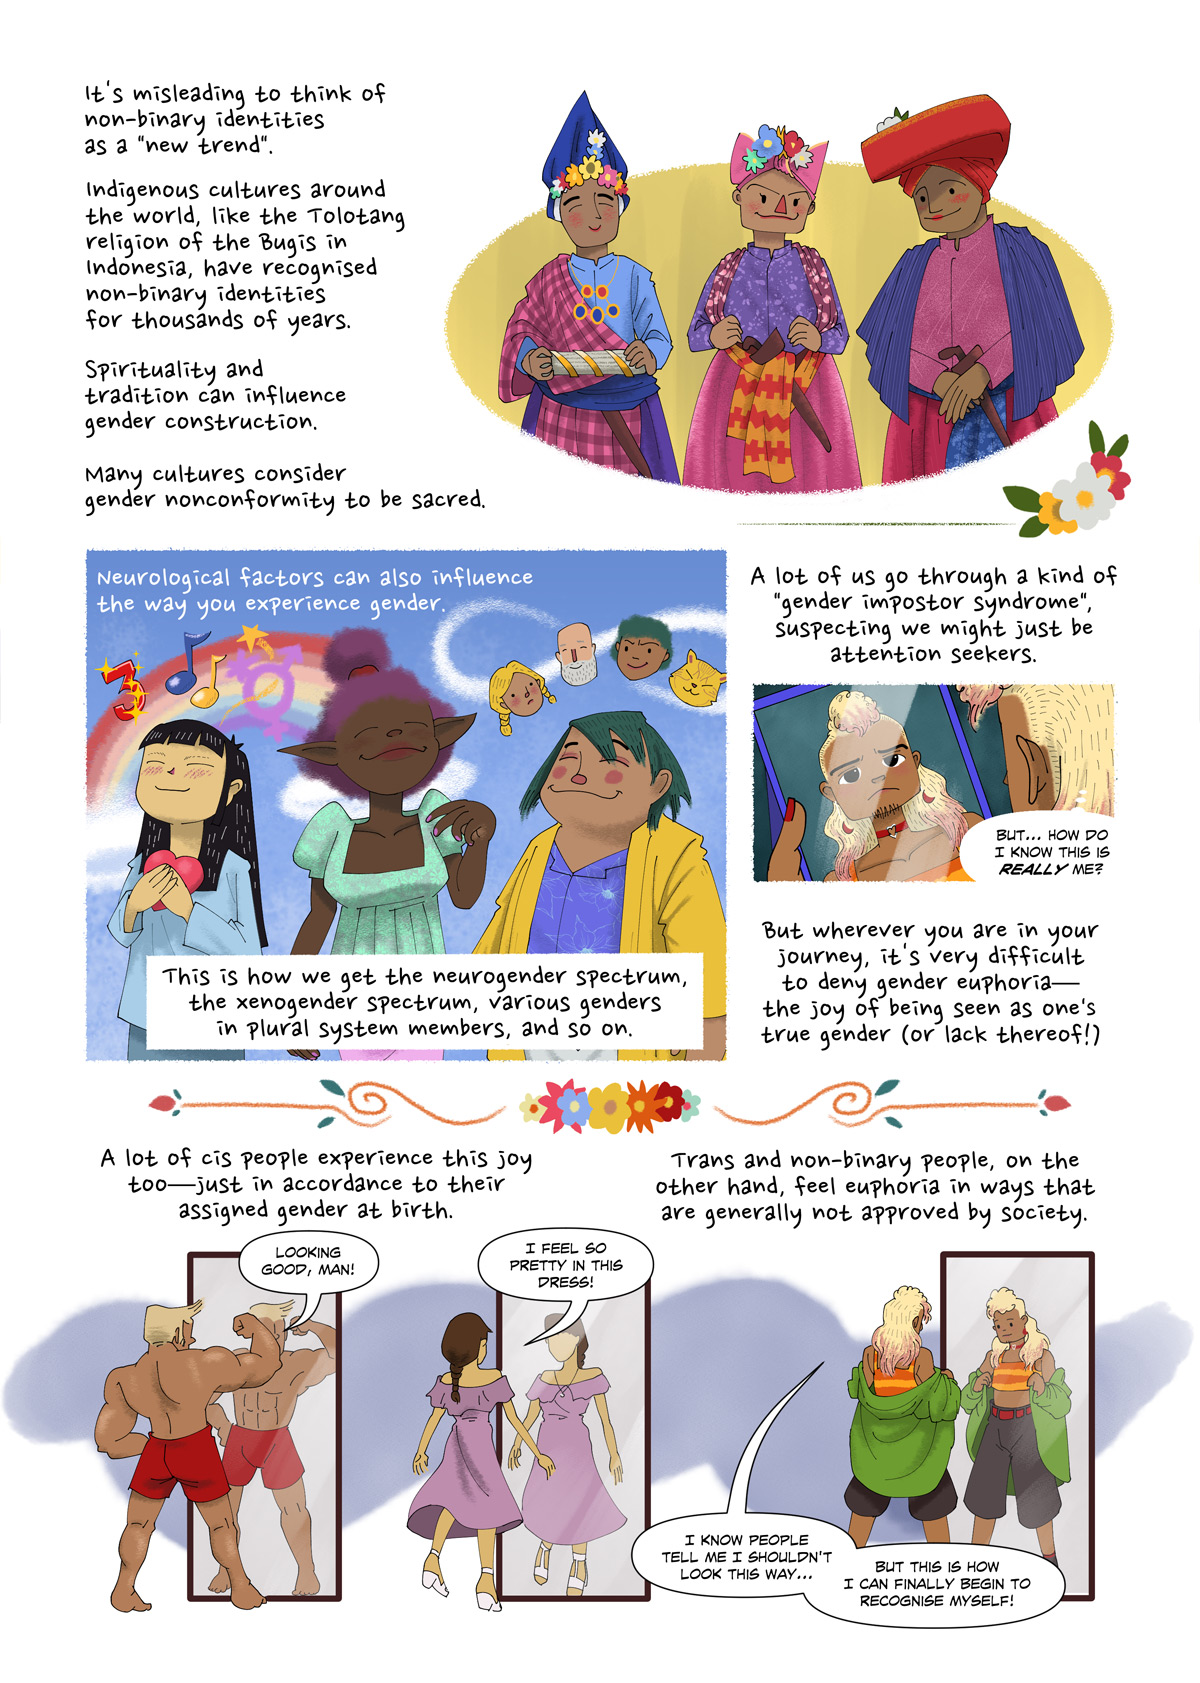 Page 3.
A comic page of four panels in black lines and full colour. The narration is provided in caption boxes.
Panel 1. Three indigenous non-binary people are standing side by side. Their garments show that they are from the Tolotang religion. Narrator: “It’s misleading to think of non-binary identities as a “new trend”. Indigenous cultures around the world, like the Tolotang religion of the Bugis in Indonesia, have recognised non-binary identities for thousands of years. Spirituality and tradition can influence gender construction. Many cultures consider gender nonconformity to be sacred.”
Panel 2. Three people are smiling. One is indicated to have synesthesia (via numbers/letters/music with various colors and textures), another is drawn as an elf, and the other is indicated to be a plural system with multiple headmates. Narrator: “Neurological factors can also influence the way you experience gender. This is how we get the neurogender spectrum, the xenogender spectrum, various genders in plural system members, and so on.”
Panel 3. The main character looks at themself in the mirror. They say: “But…how do I know if this is really me?” Narrator: “A lot of us go through a kind of “gender impostor syndrome”, suspecting we might just be attention-seekers. But wherever you are in your gender journey, it’s very difficult to deny gender euphoria—the joy of being seen as one’s true gender (or lack thereof!)”
Panel 4. A cis man and woman look at themselves in the mirror happily. The man flexes his biceps, exclaiming: “Looking good, man!”, the woman says: “I feel so pretty in this dress!”. Narrator: “A lot of cis people experience this joy too—just in accordance to the gender they were assigned at birth.”
Panel 5. The main character is finally happy with themself in the mirror. Narrator: “Trans and non-binary people, on the other hand, feel euphoria in ways that are generally not approved by society.” Main character: “I know people tell me I shouldn’t look this way, but this is how I can finally begin to recognise myself…”
